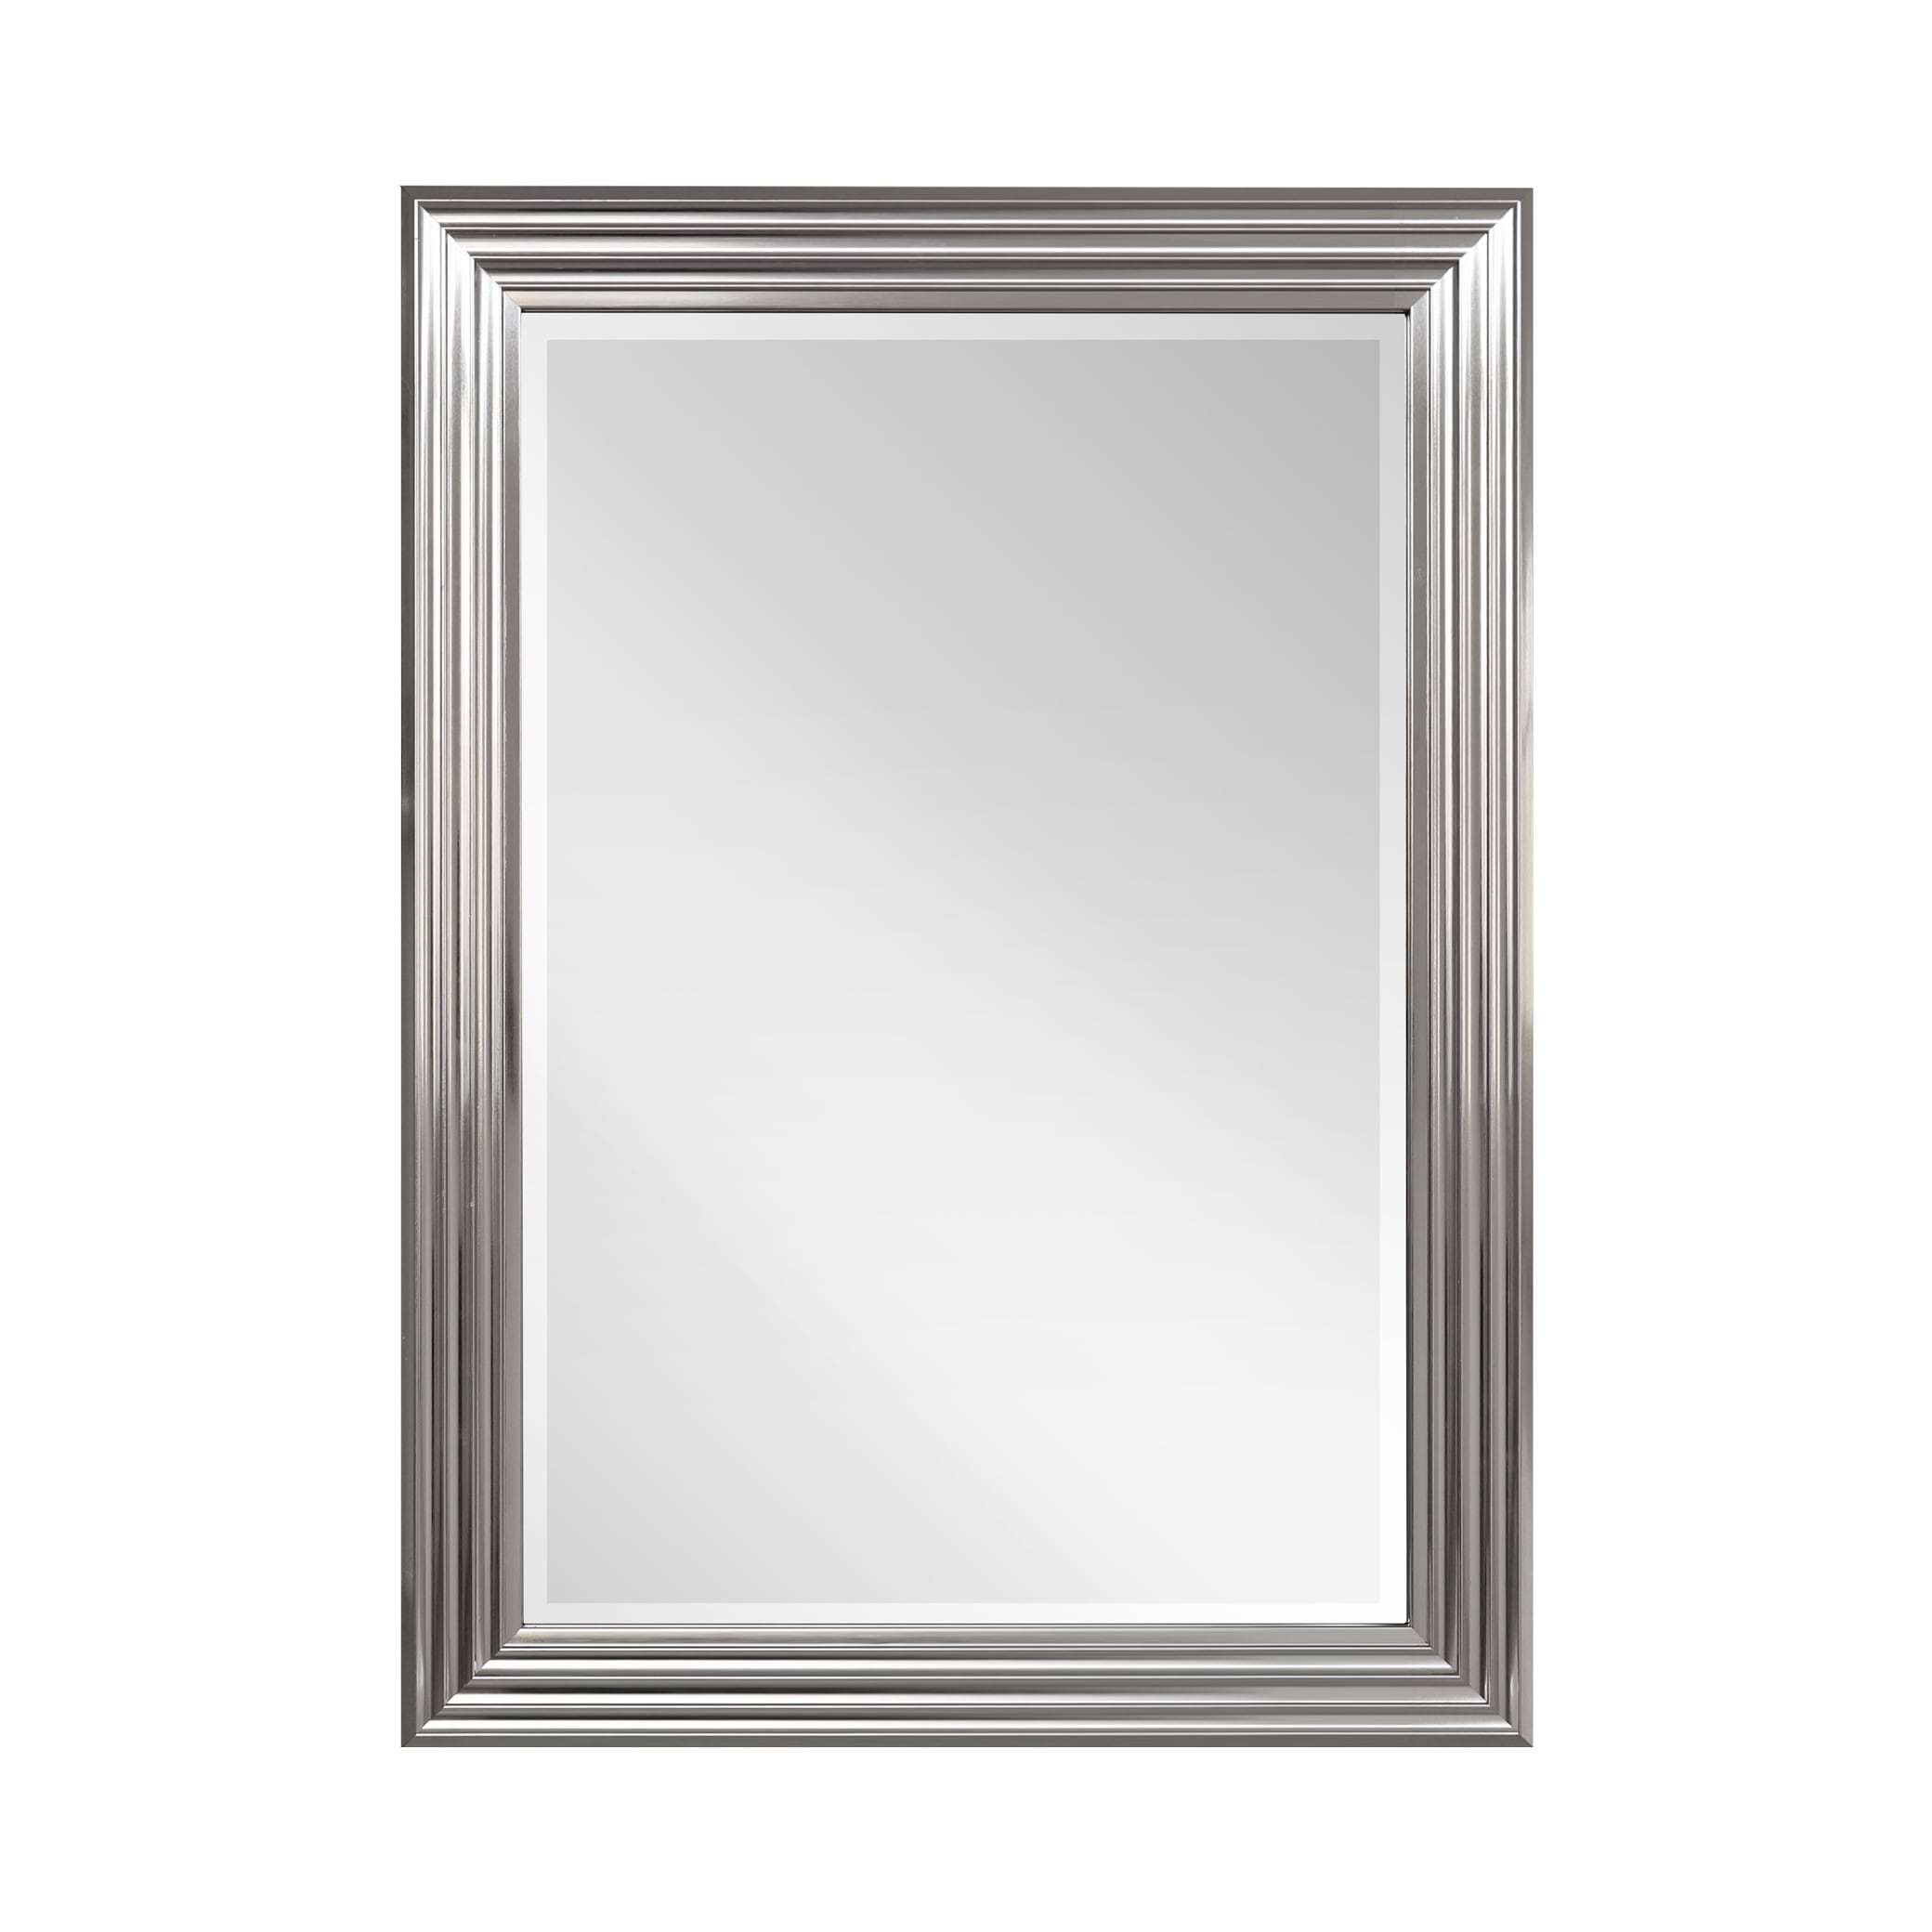 Gardner Glass Products 48-in W x 42-in H Bronze MDF Traditional Mirror Frame Kit Hardware Included | 15231